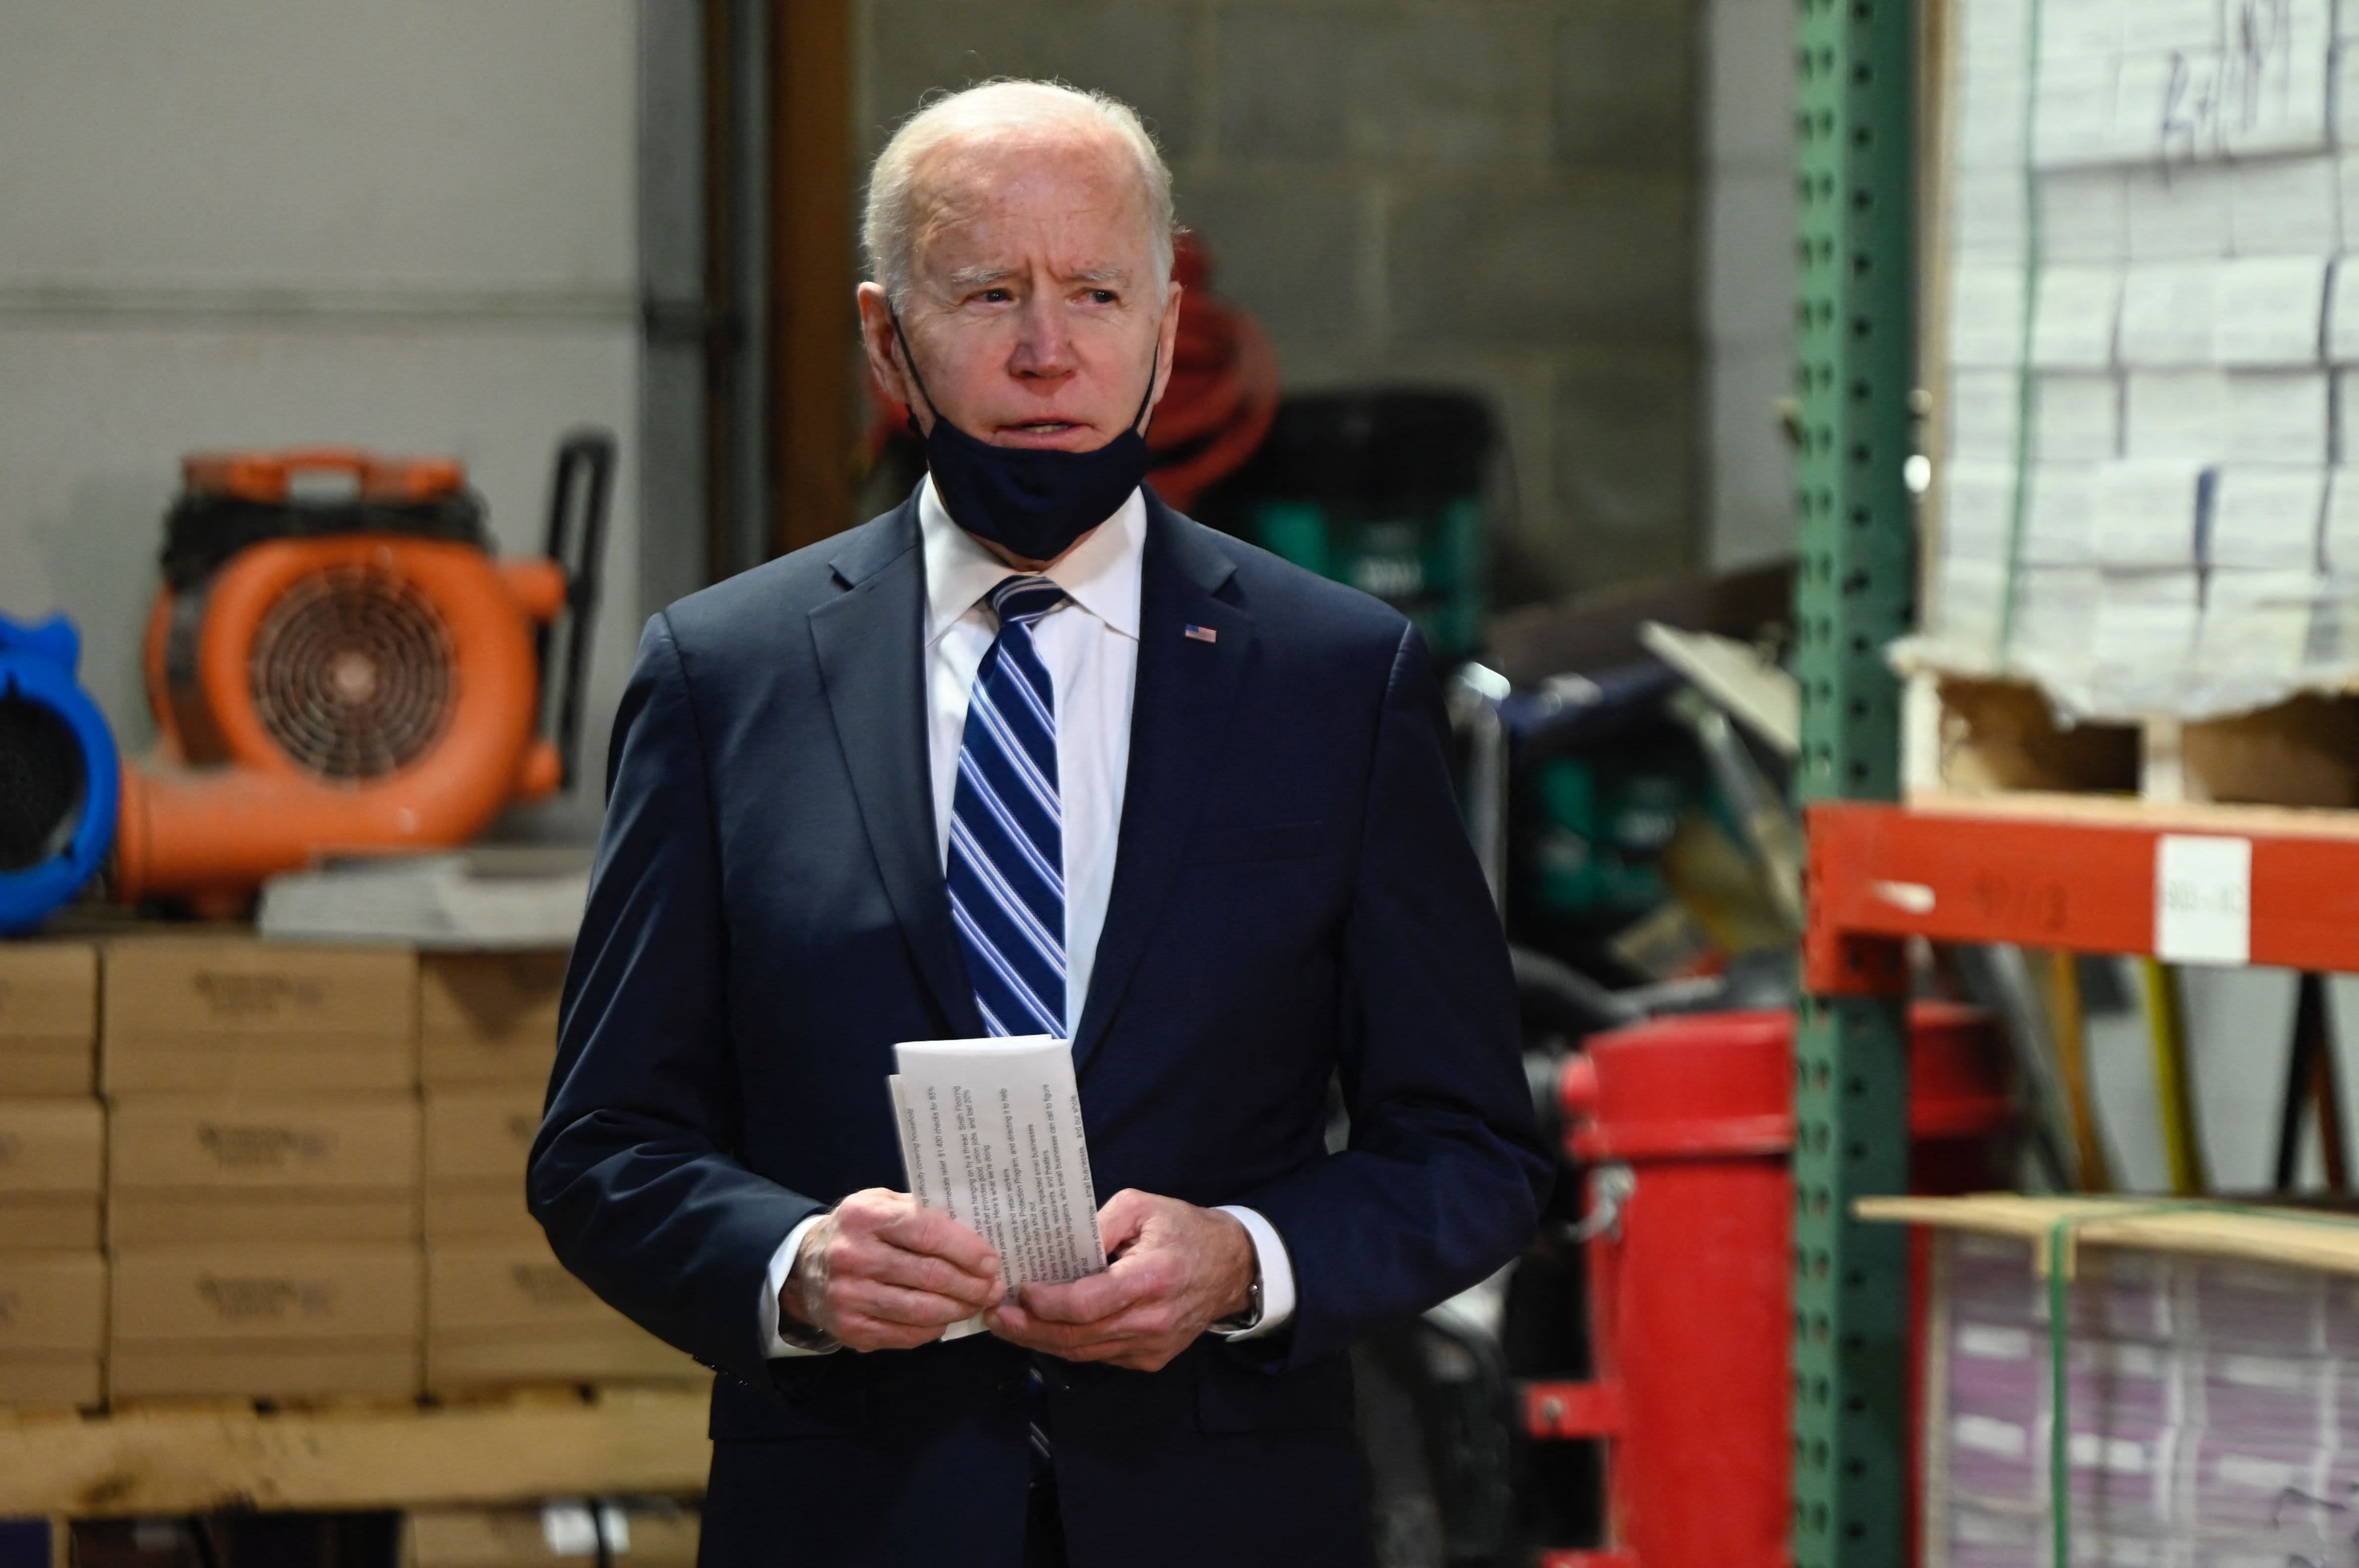 Biden's tax plan targets big companies, so why is small business worried?